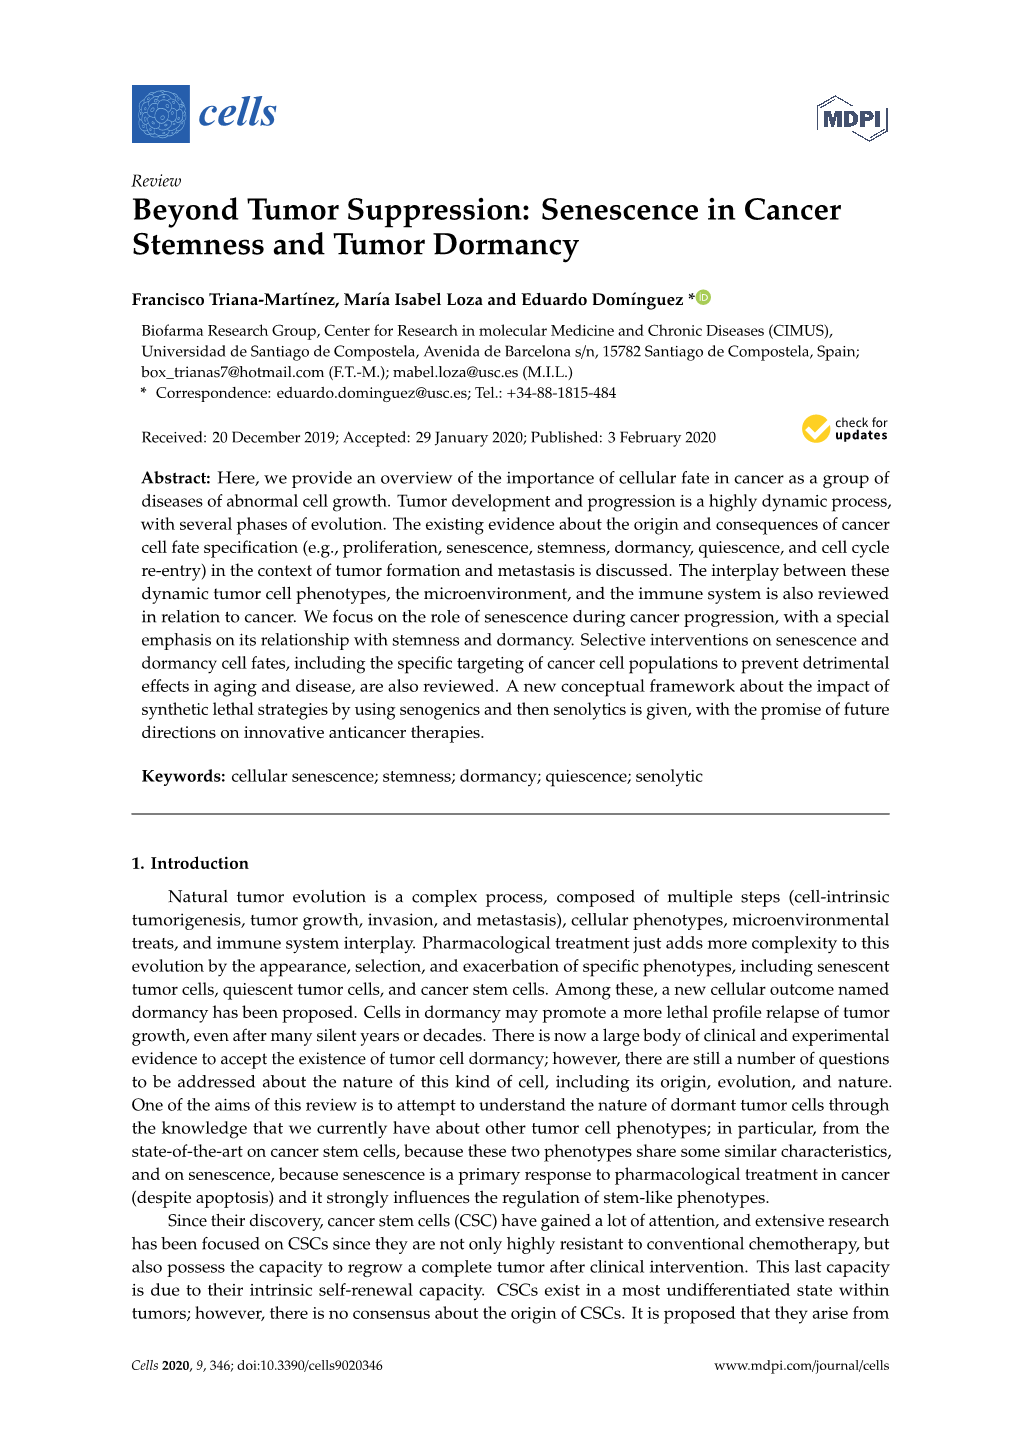 Beyond Tumor Suppression: Senescence in Cancer Stemness and Tumor Dormancy